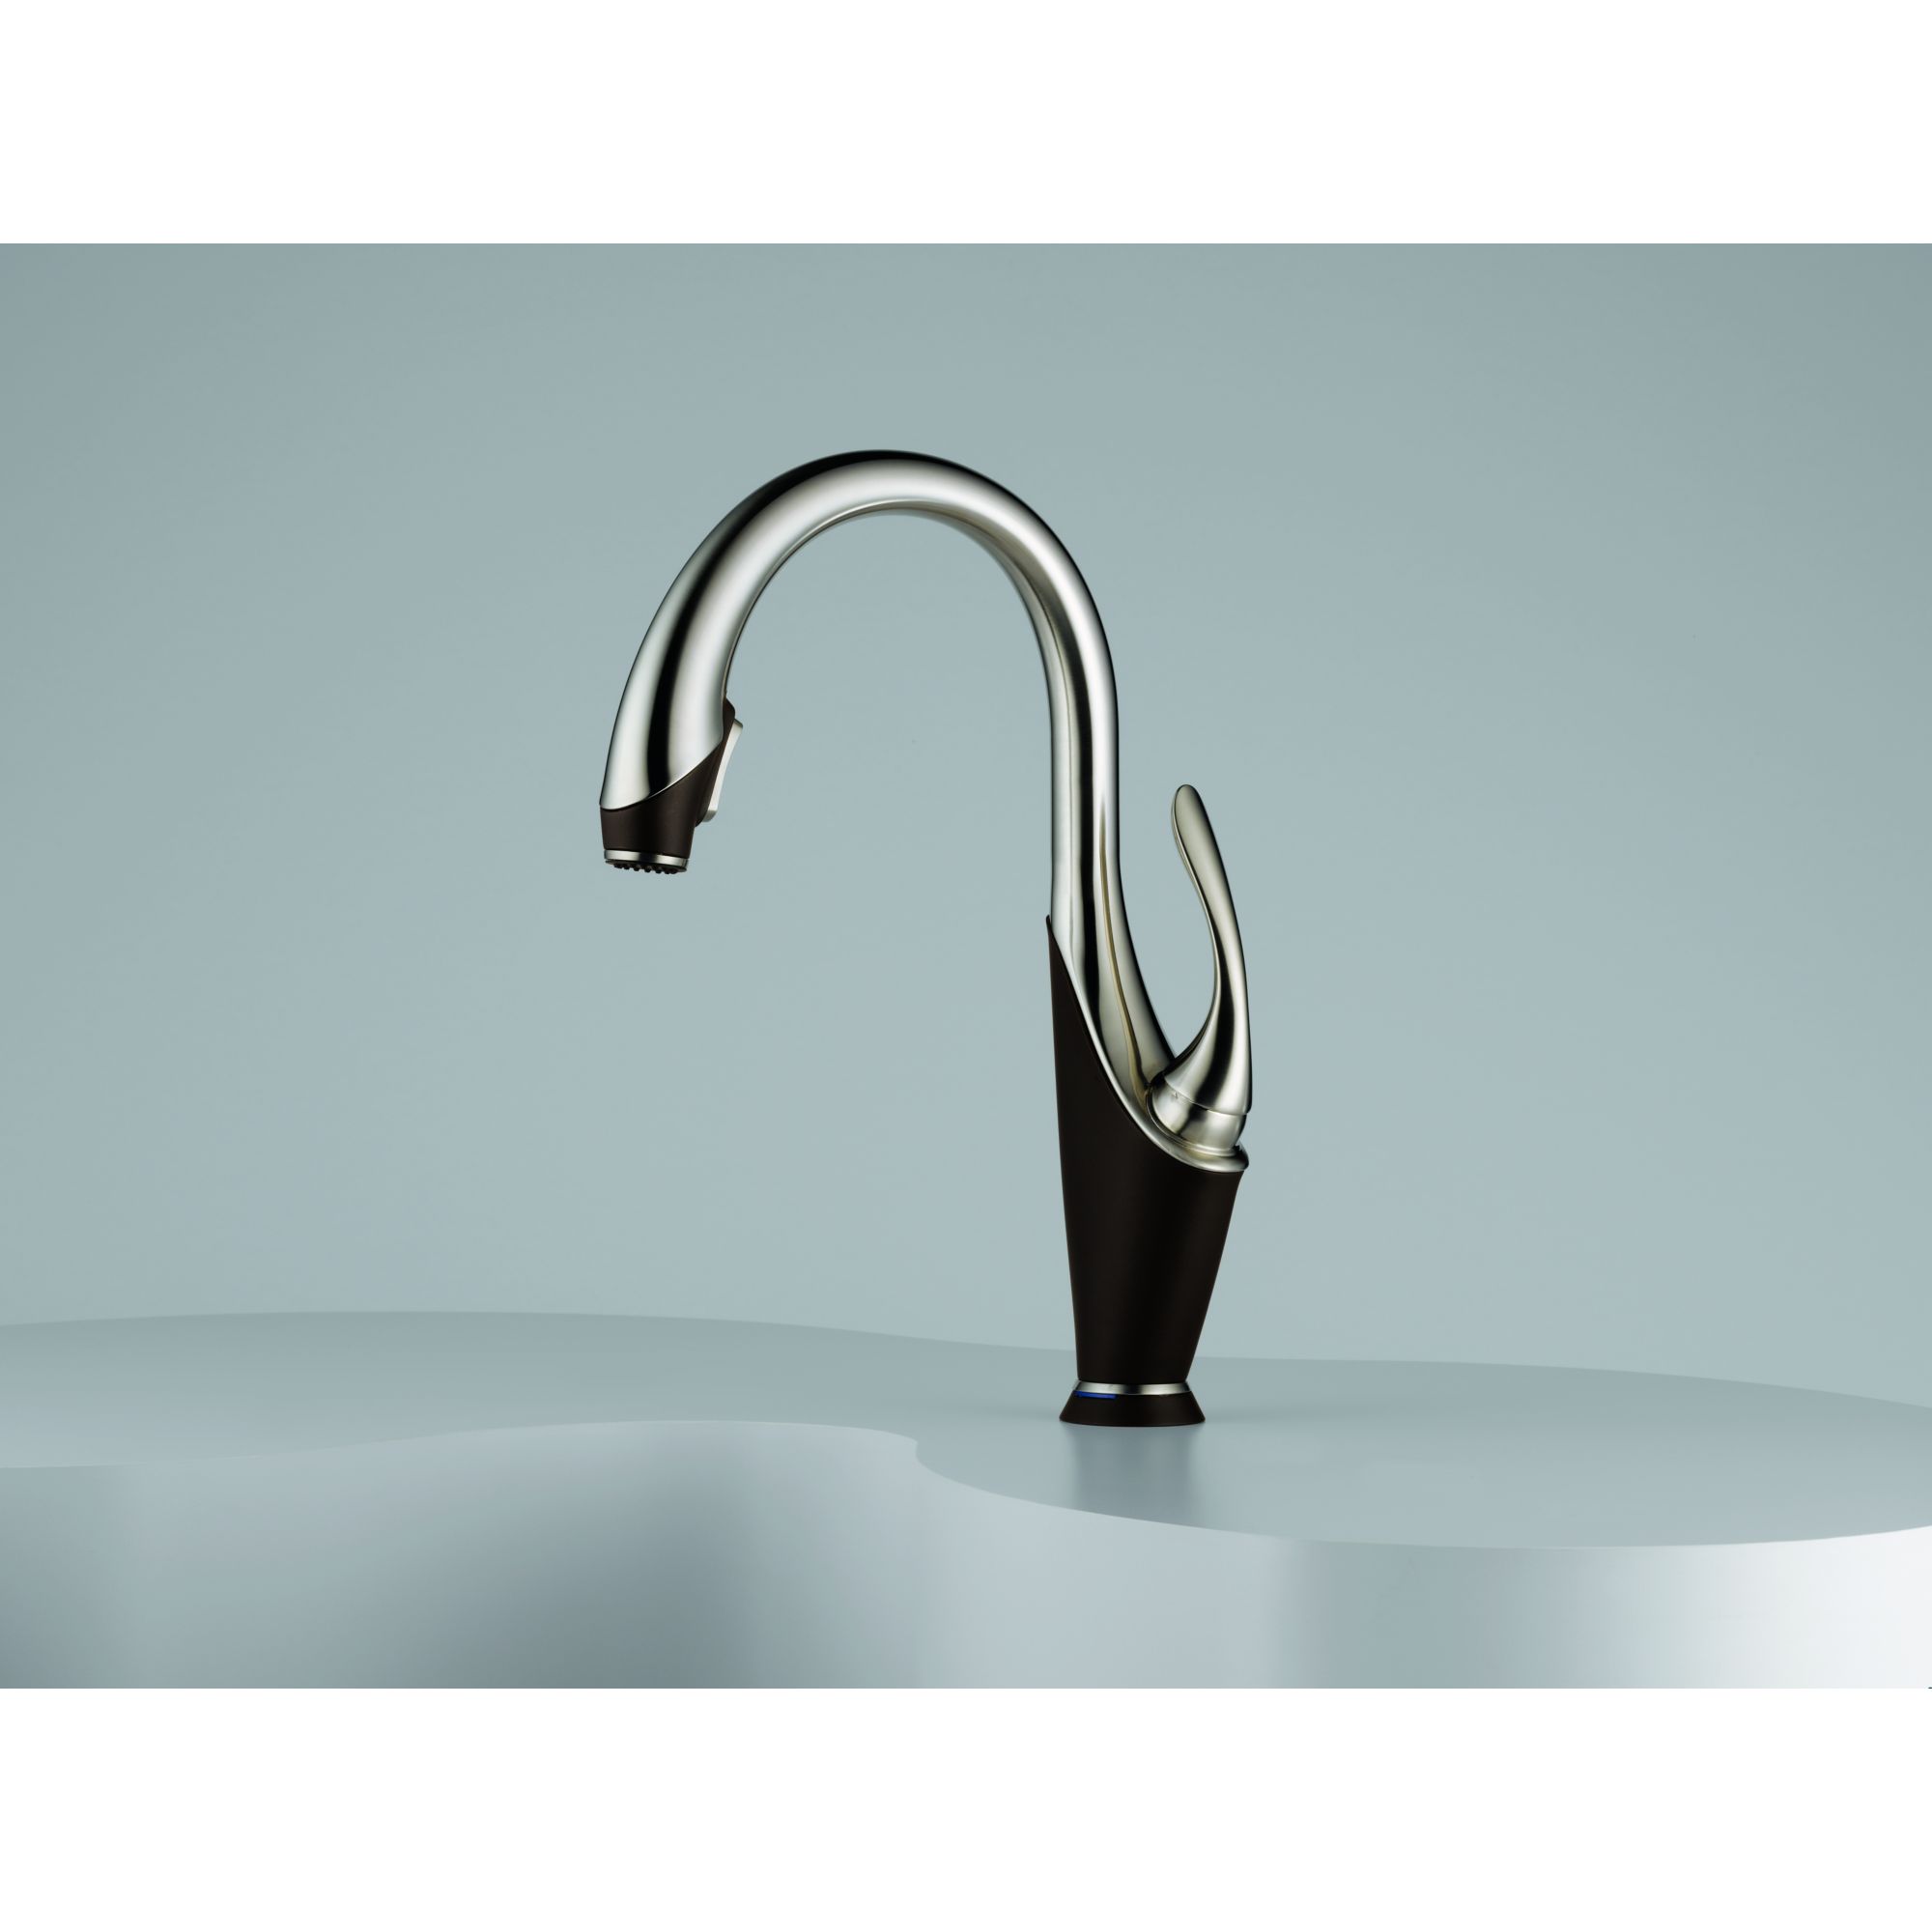 Stylish Swan Inspired Vuelo Faucets From Brizo Interior Design